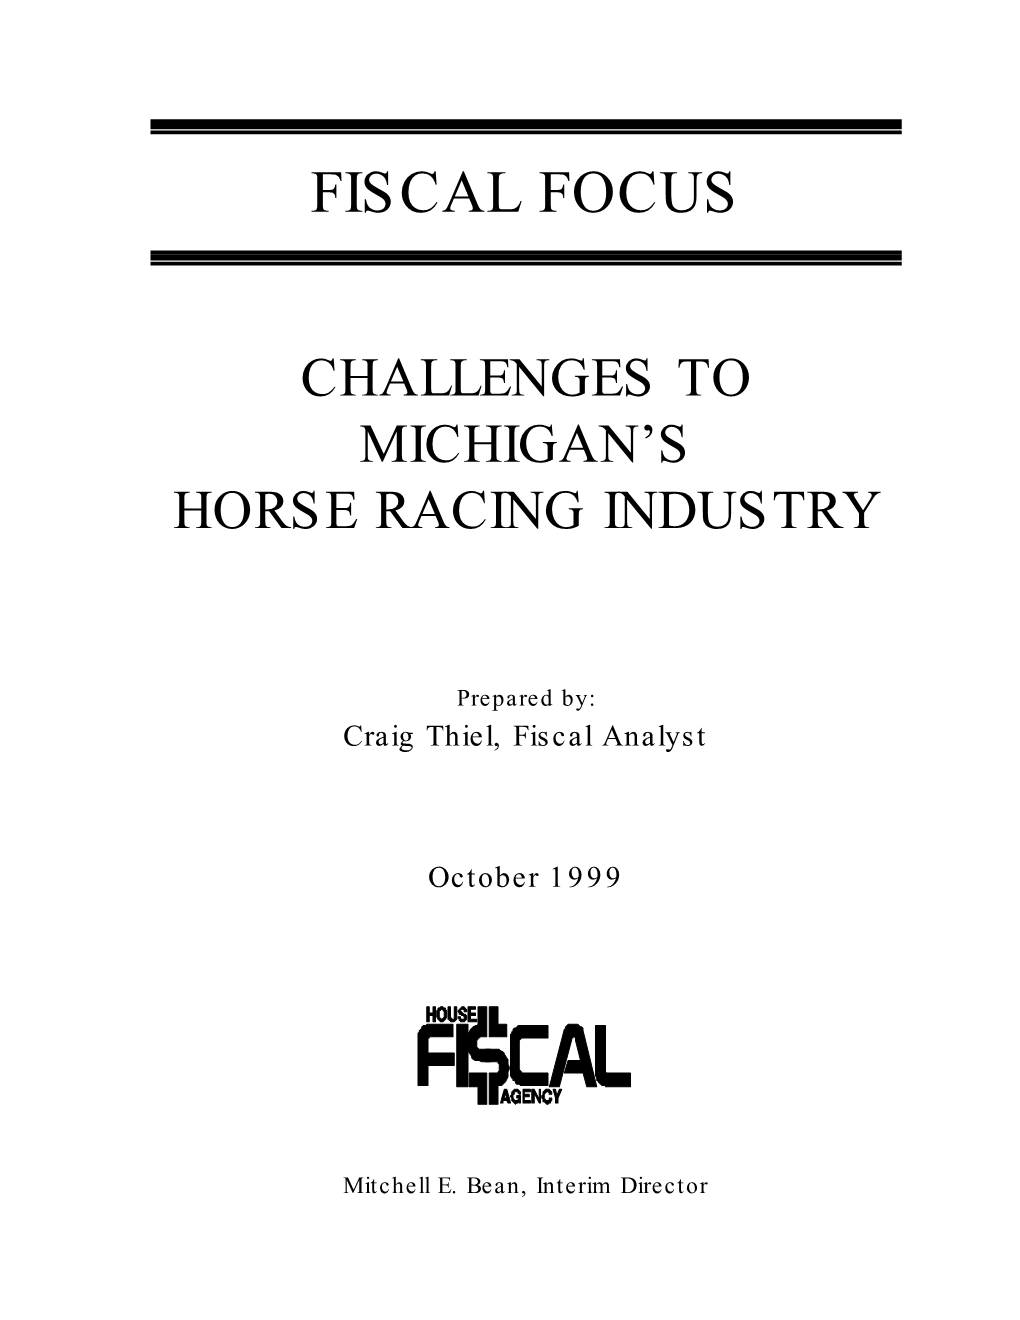 Challenges to Michigan's Horse Racing Industry (Fiscal Focus)